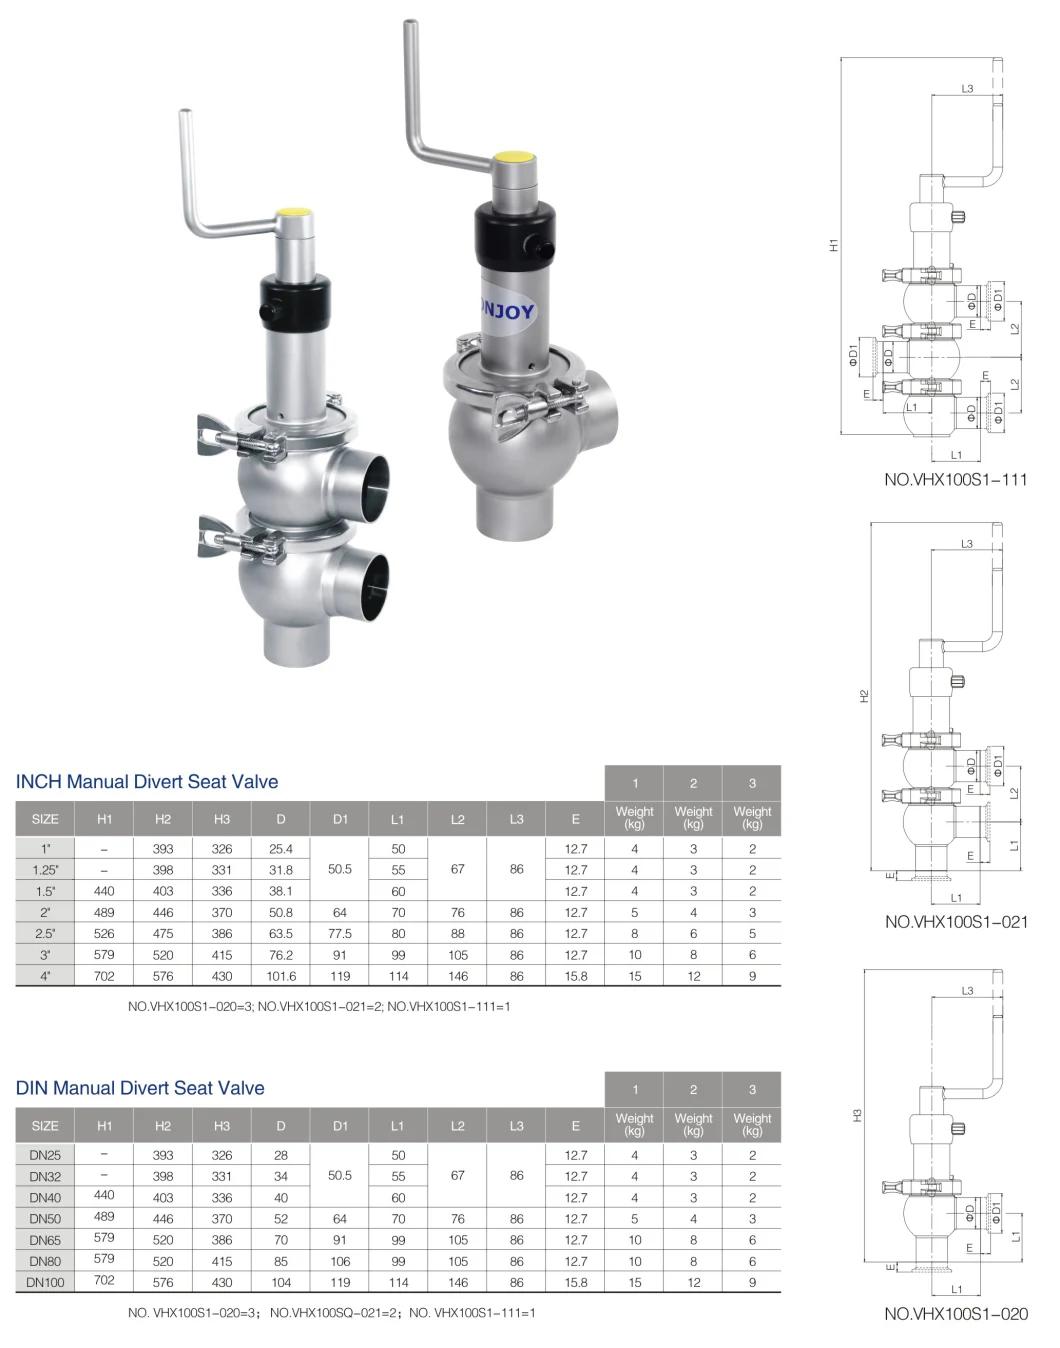 3A Certified Air Operated Shut-off and Diverter Valve